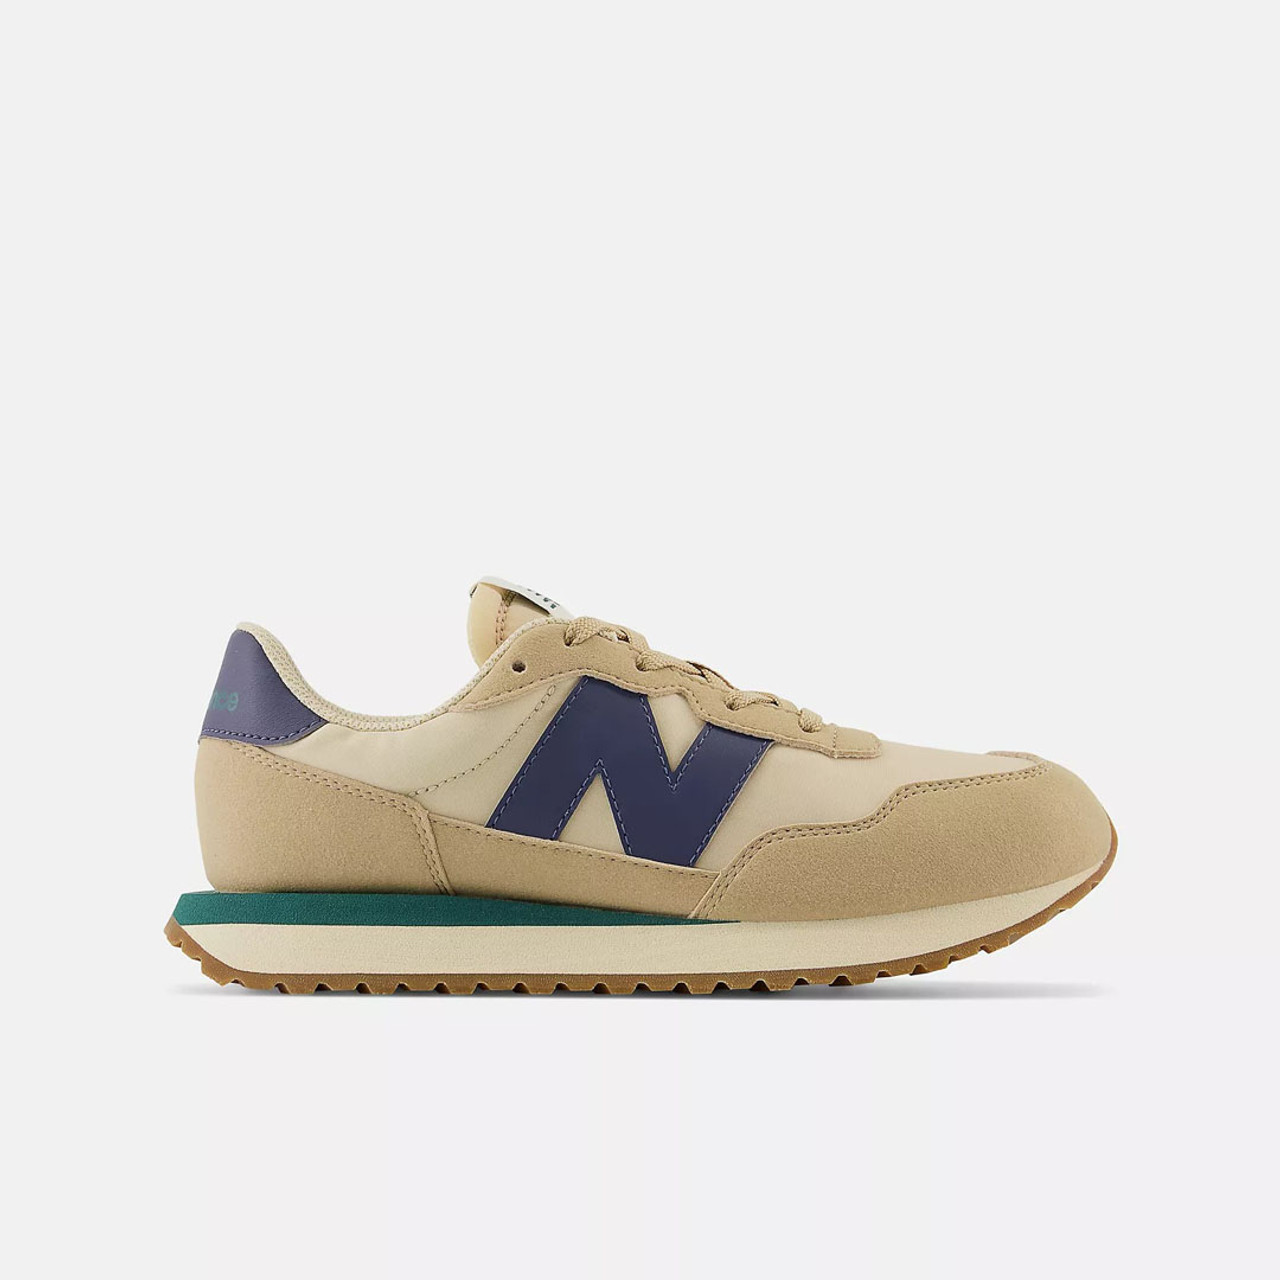 New Balance Shoes, Clothing, & Accessories